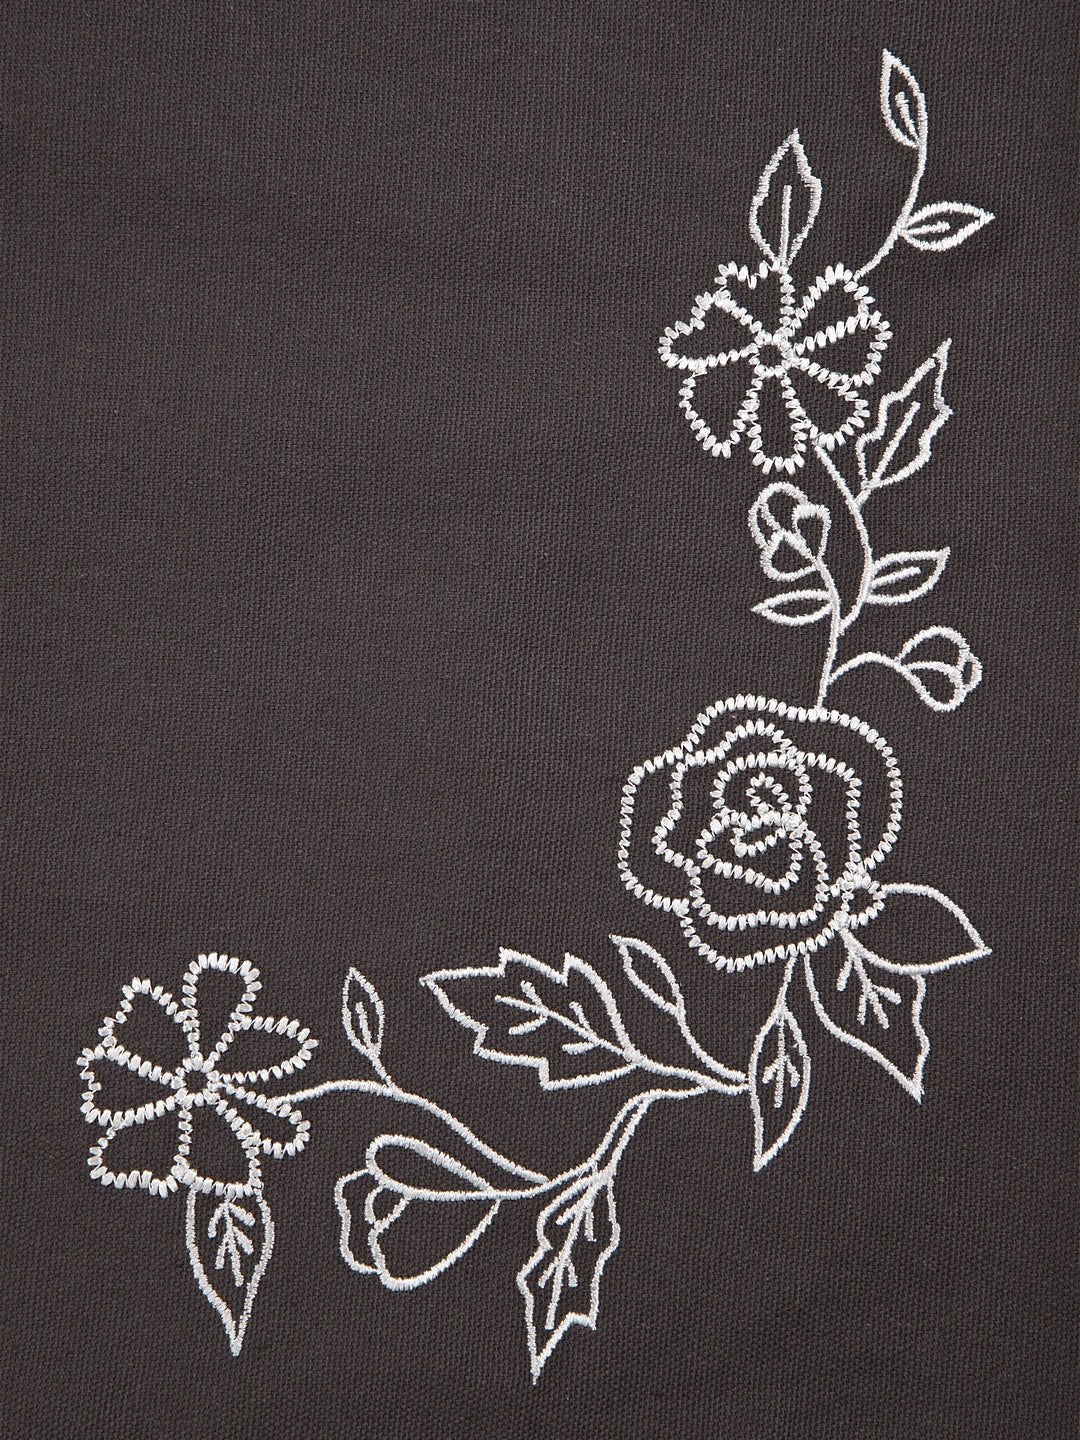 Blanc9 Set of 8 White Rose Embroidered Placemats